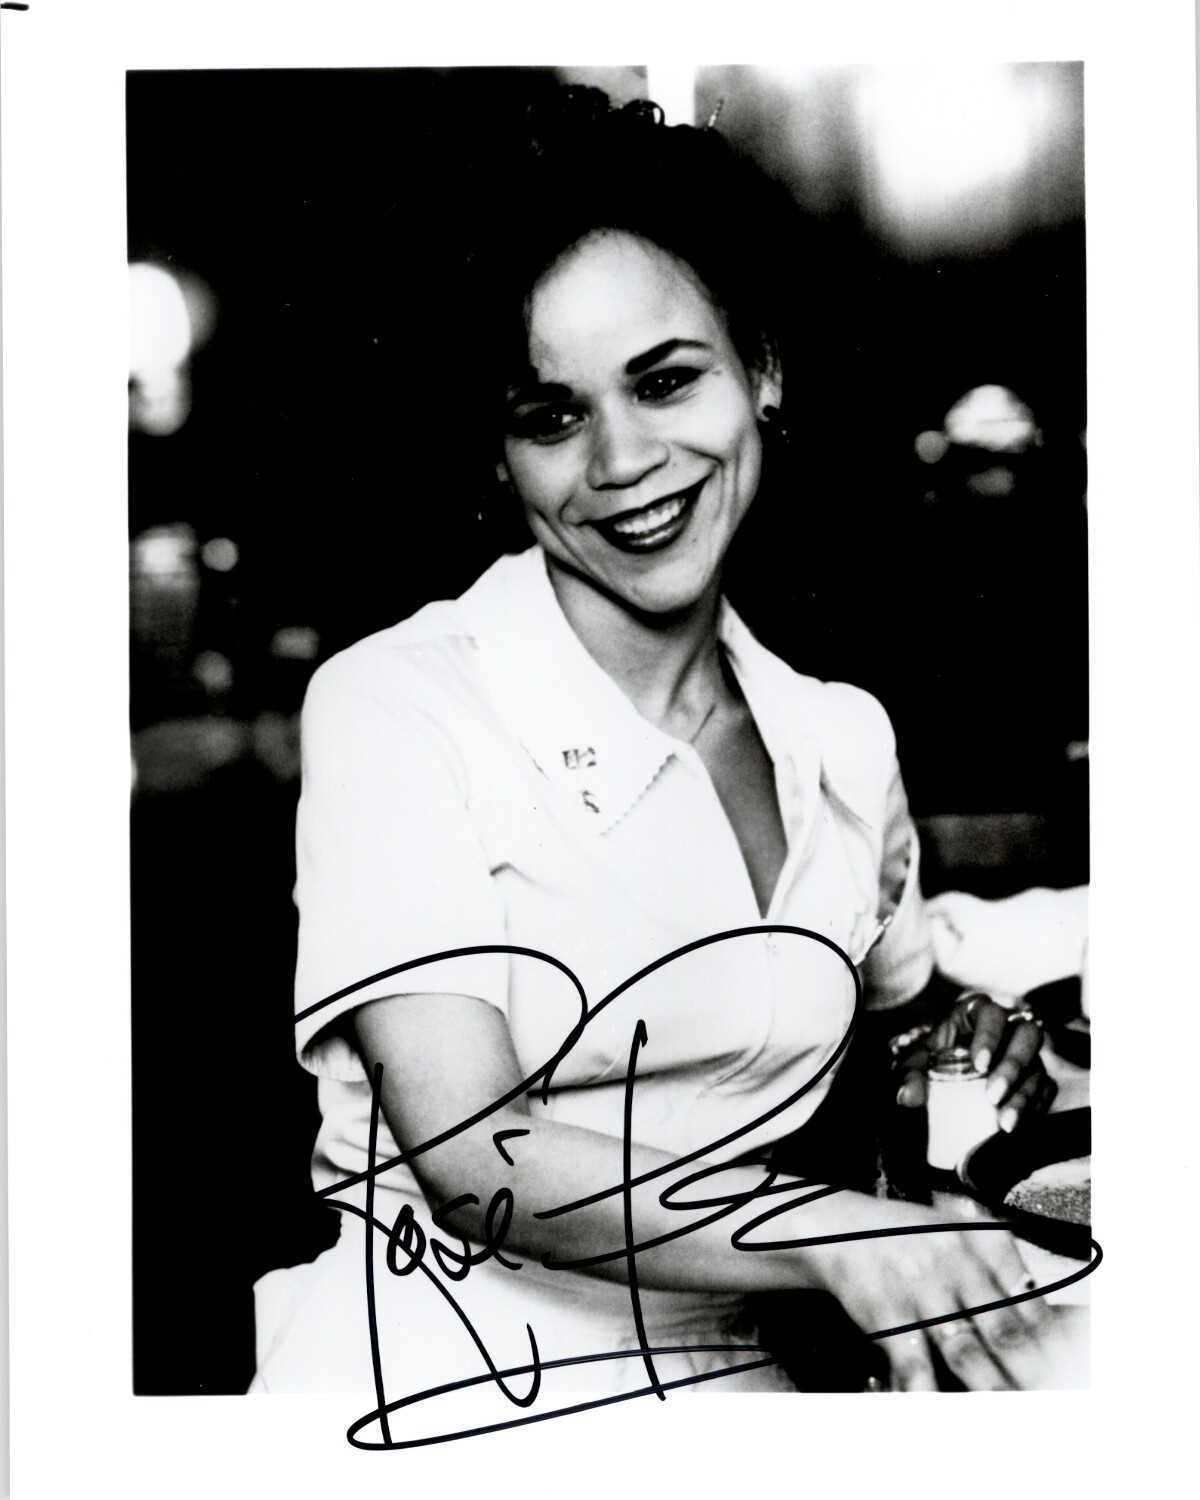 Rosie Perez Signed Autographed Glossy 8x10 Photo - $39.99